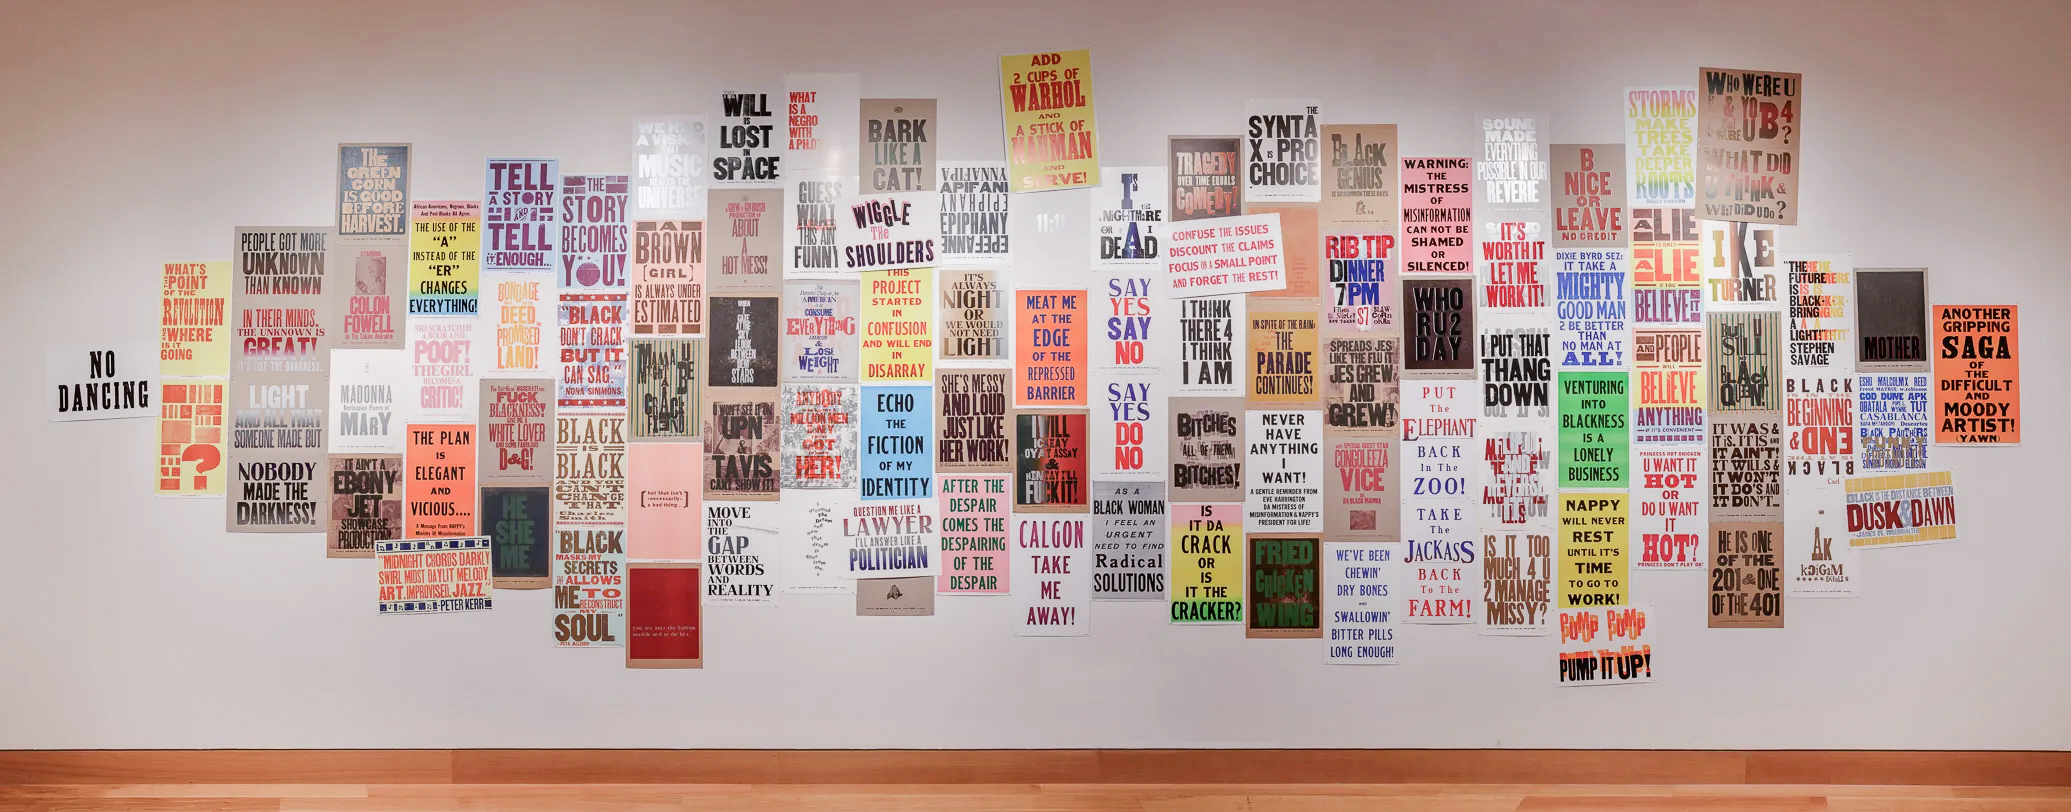 A large white is covered, from almost floor to ceiling, in multi-colored text-based letterpress posters as part of an art installation.